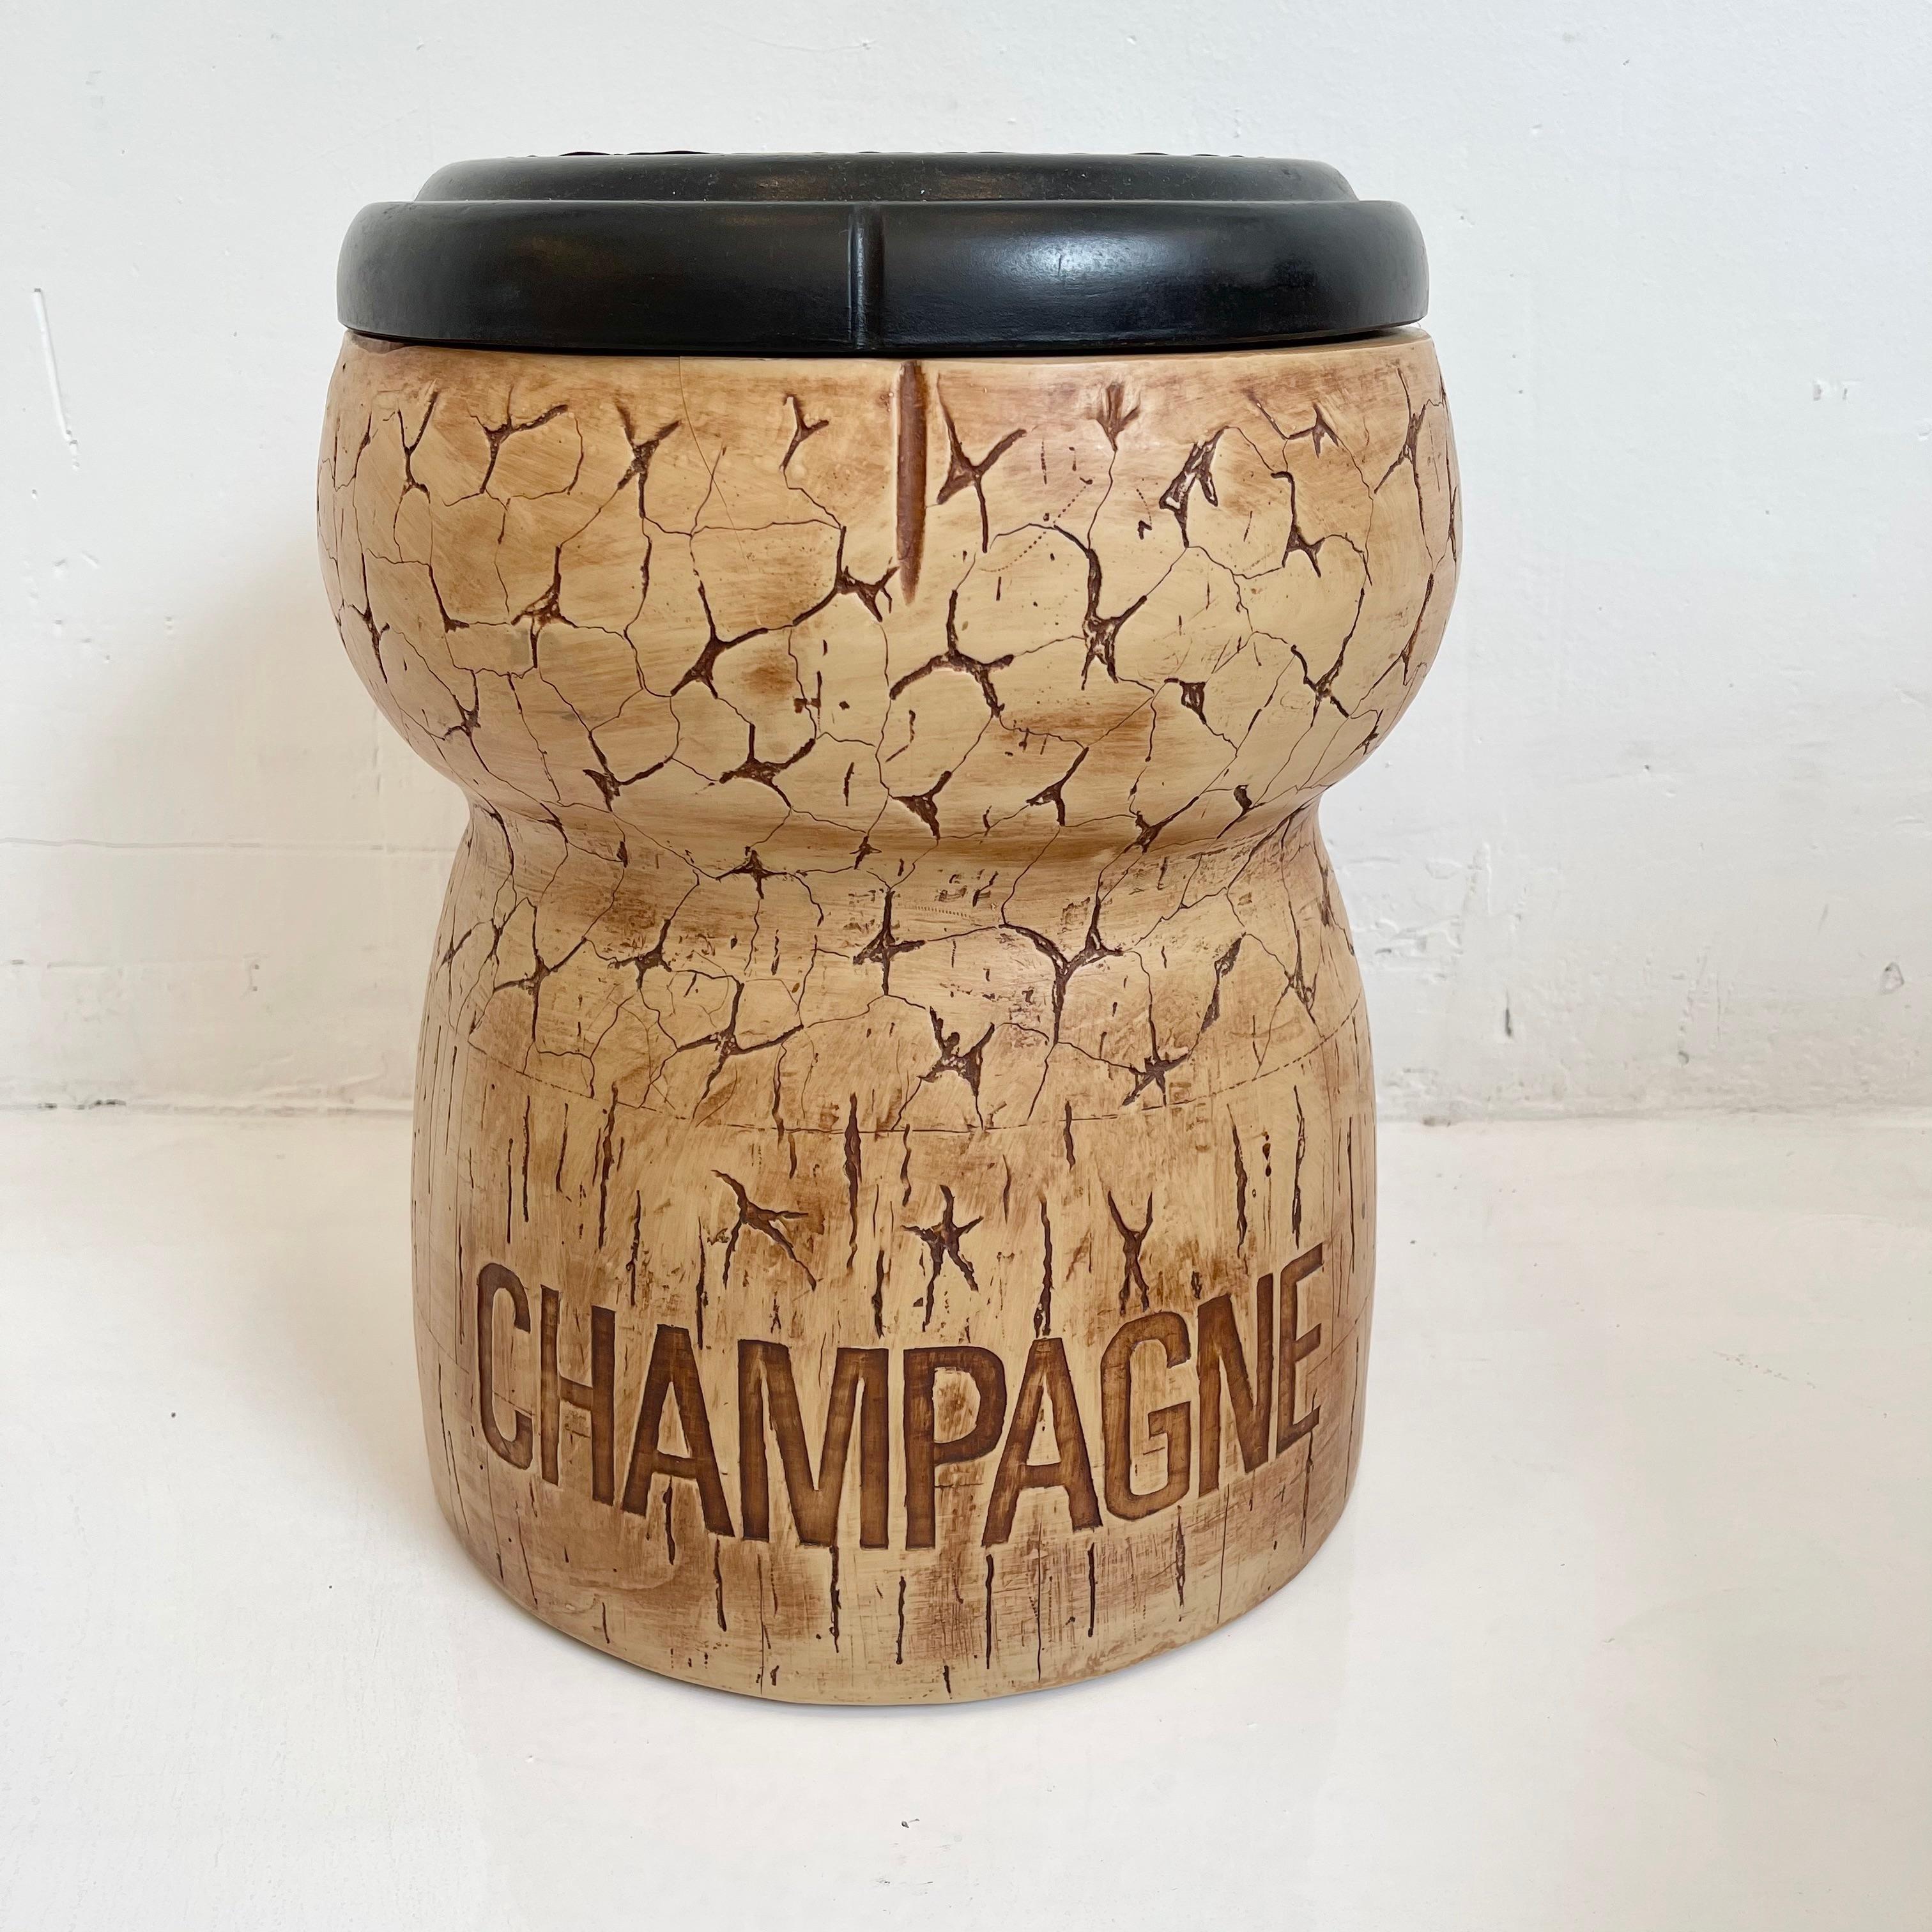 American Giant Champagne Cooler by Think Big, 1987